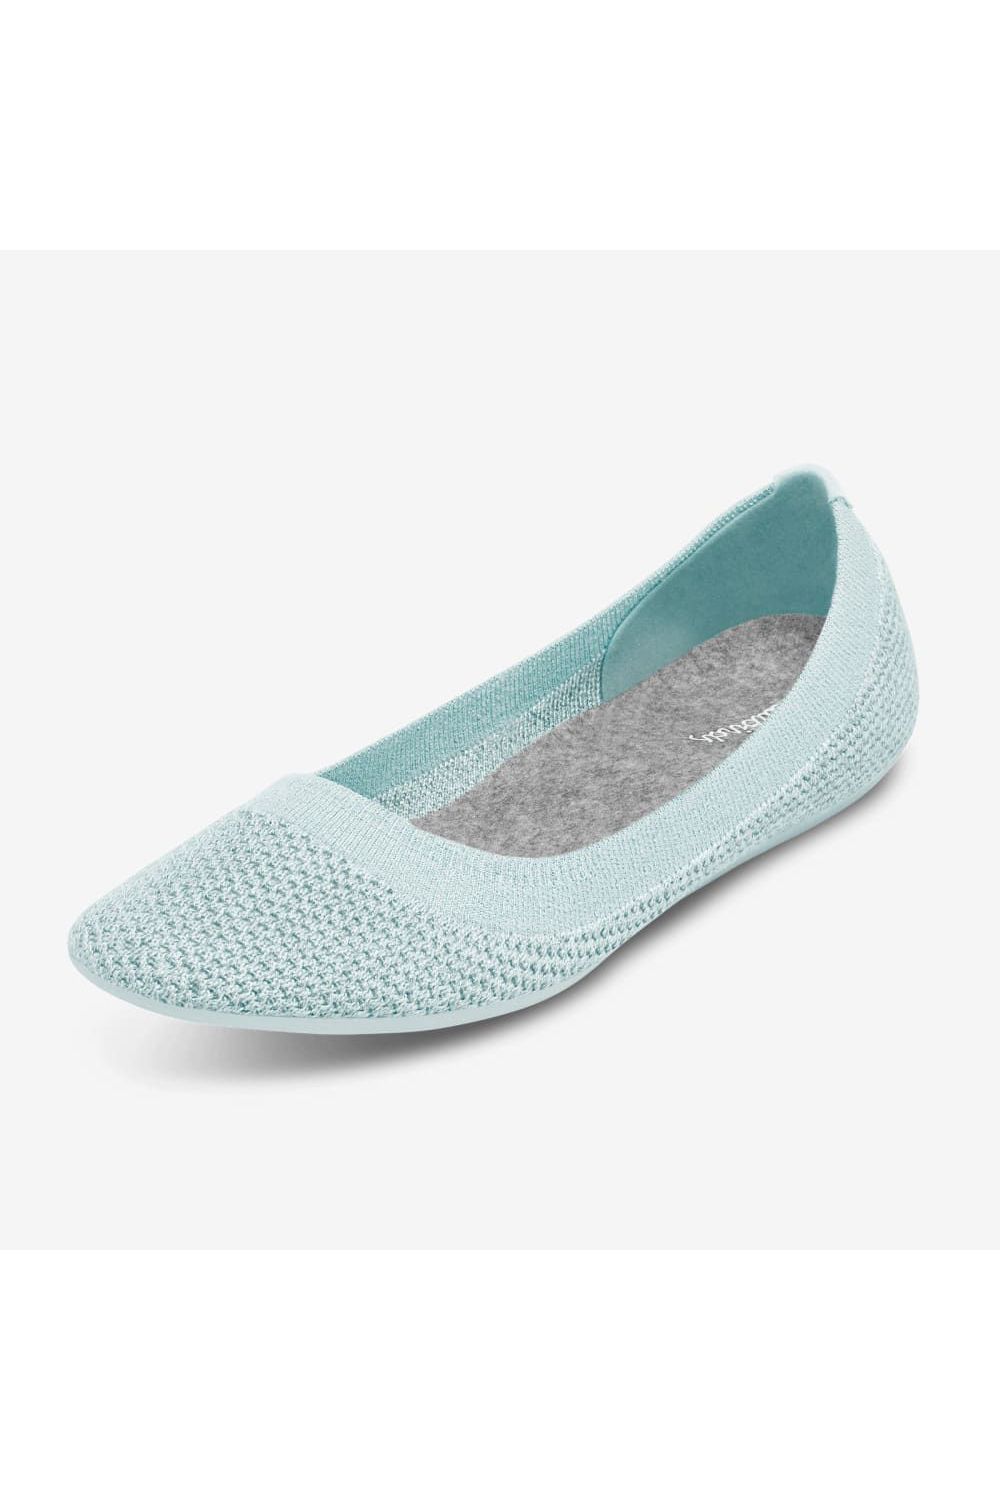 comfortable women's flats for travel